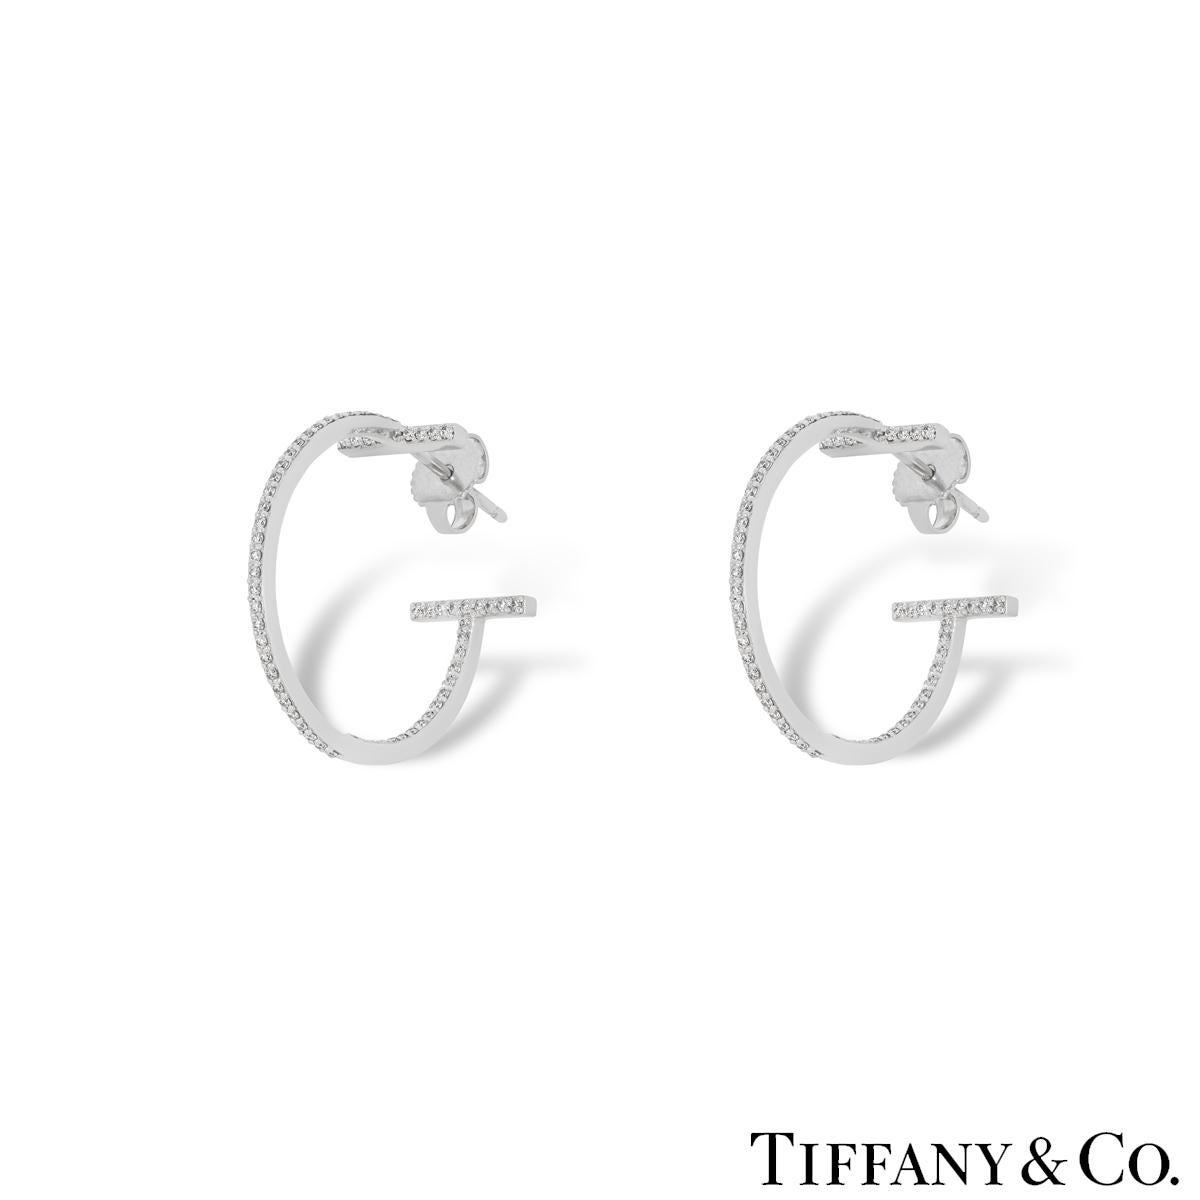 An elegant pair of 18k white gold diamond earrings by Tiffany & Co. from the Tiffany T collection. The earrings are in a hoop style with the iconic Tiffany T motif at the start and finish. The inside out hoops are each pave set with 65 round